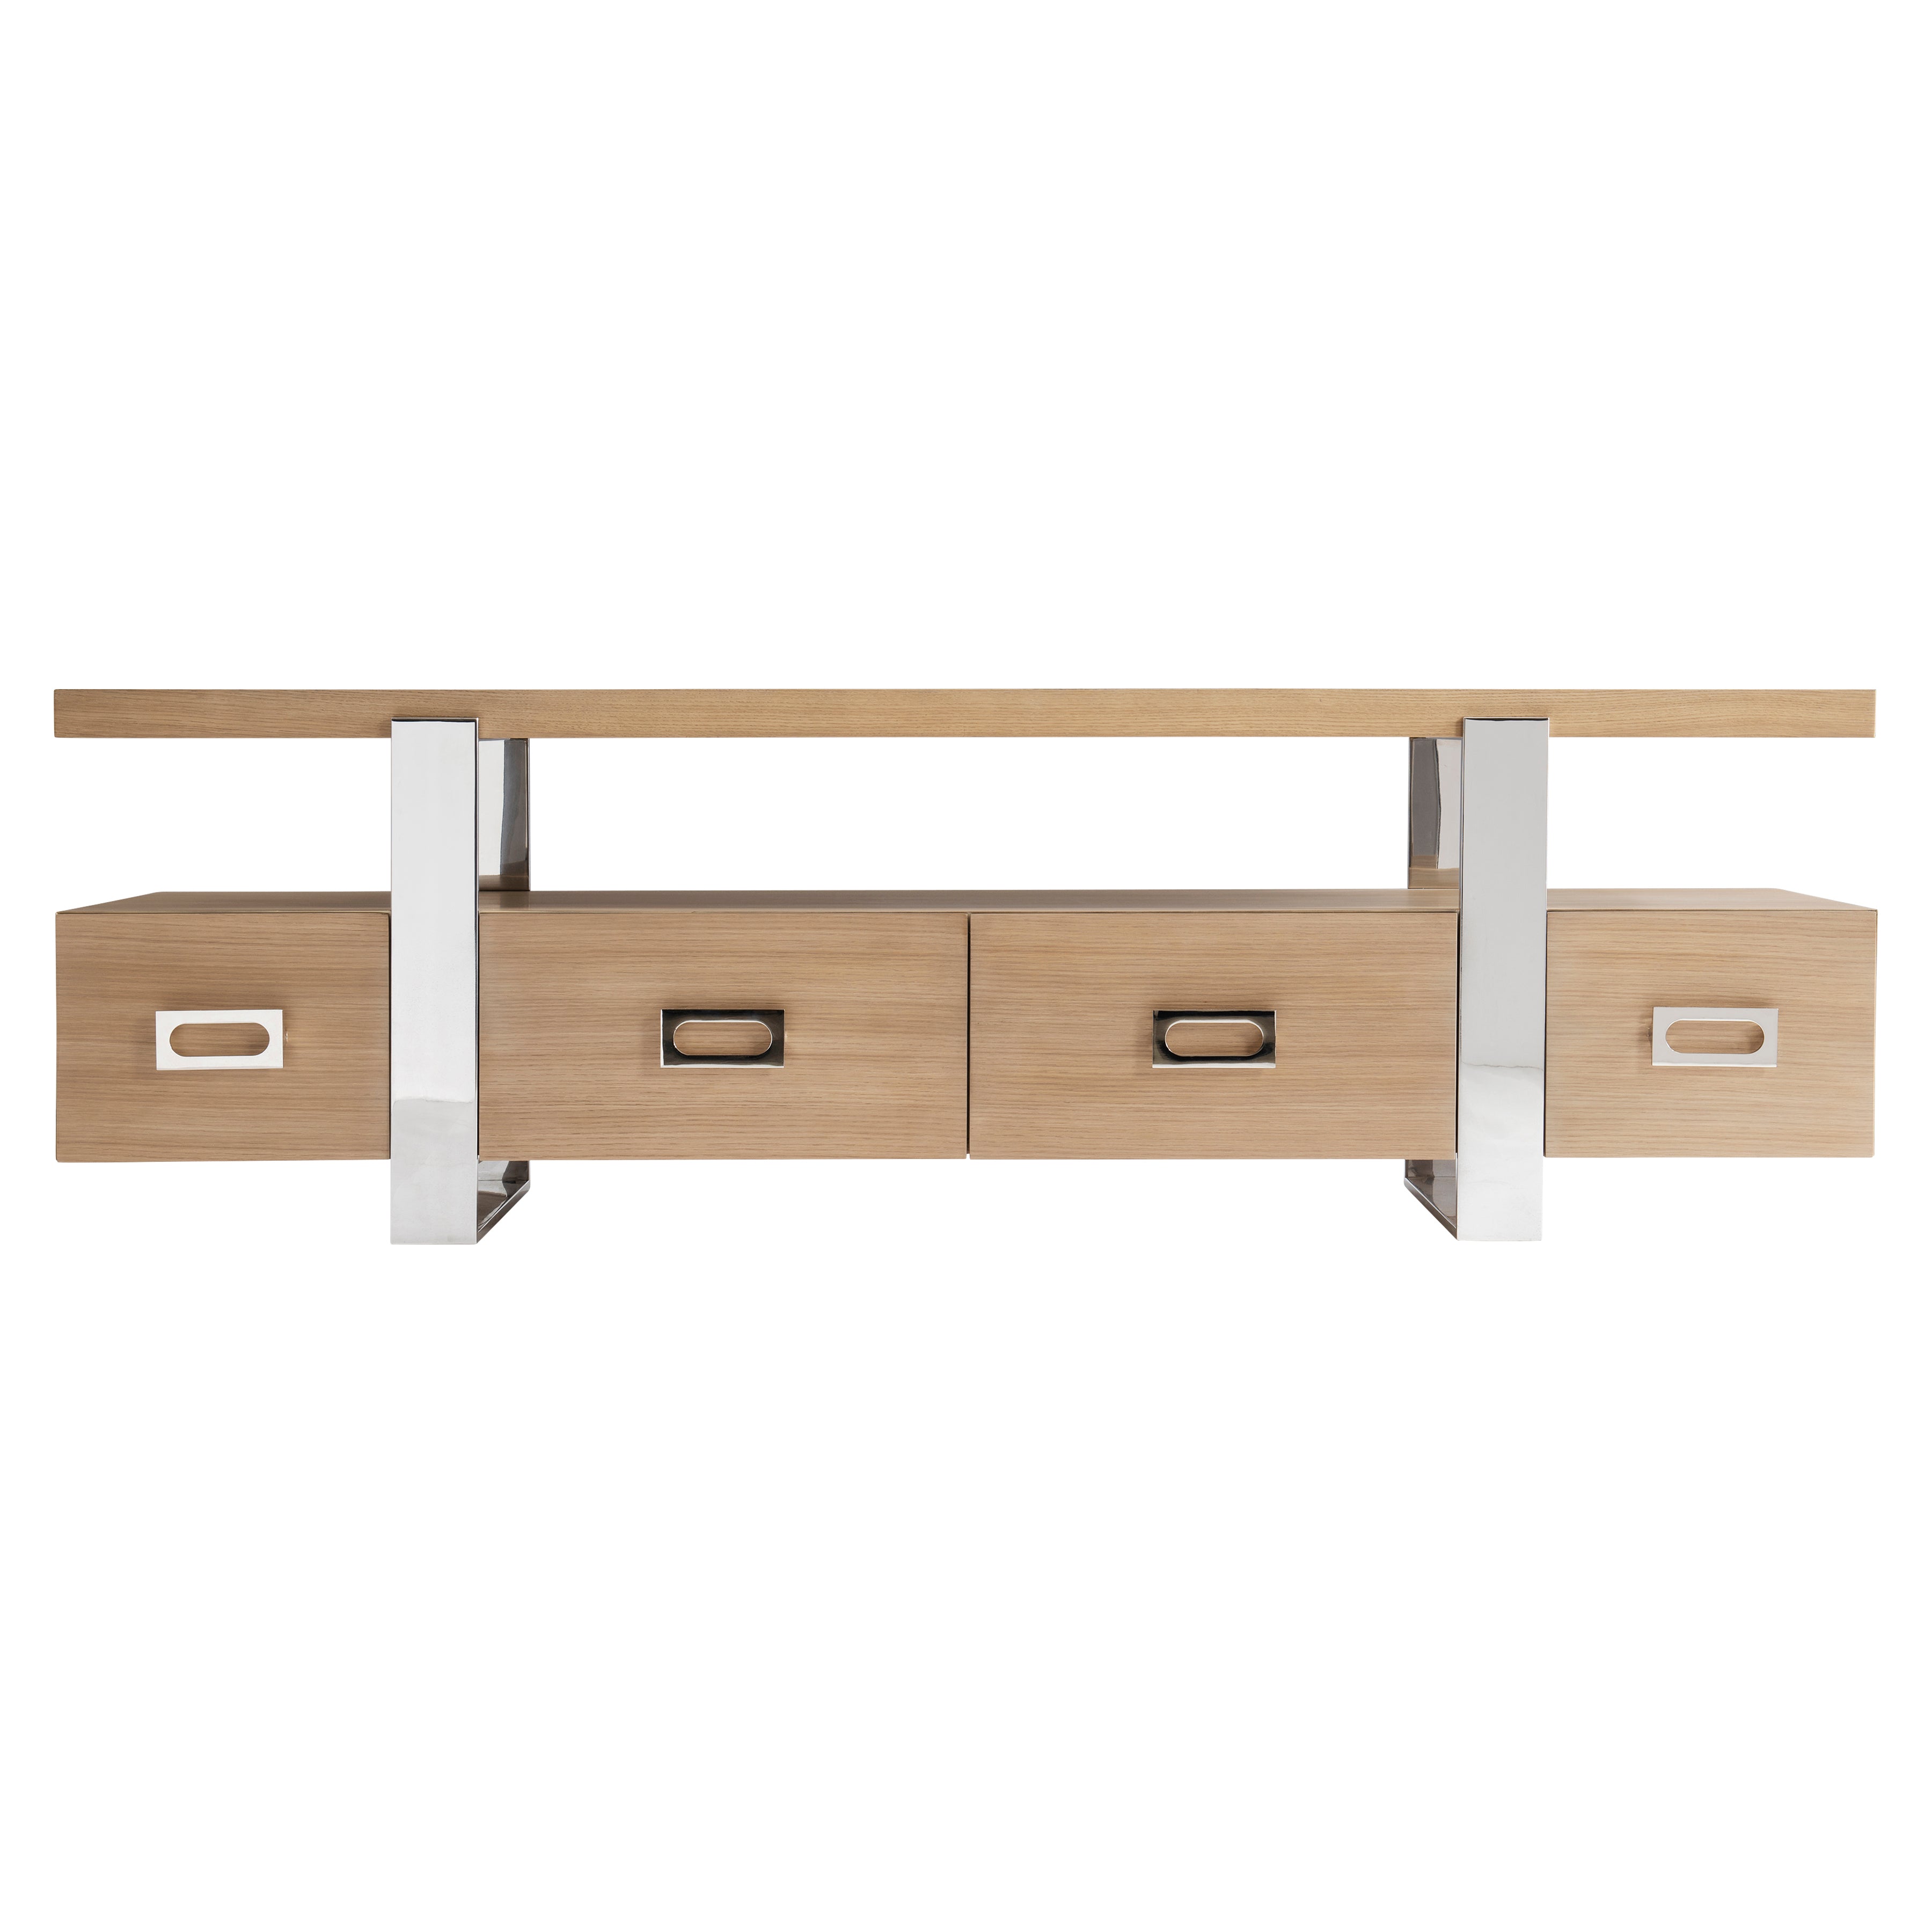 Modulum Entertainment Credenza with 4 Drawers